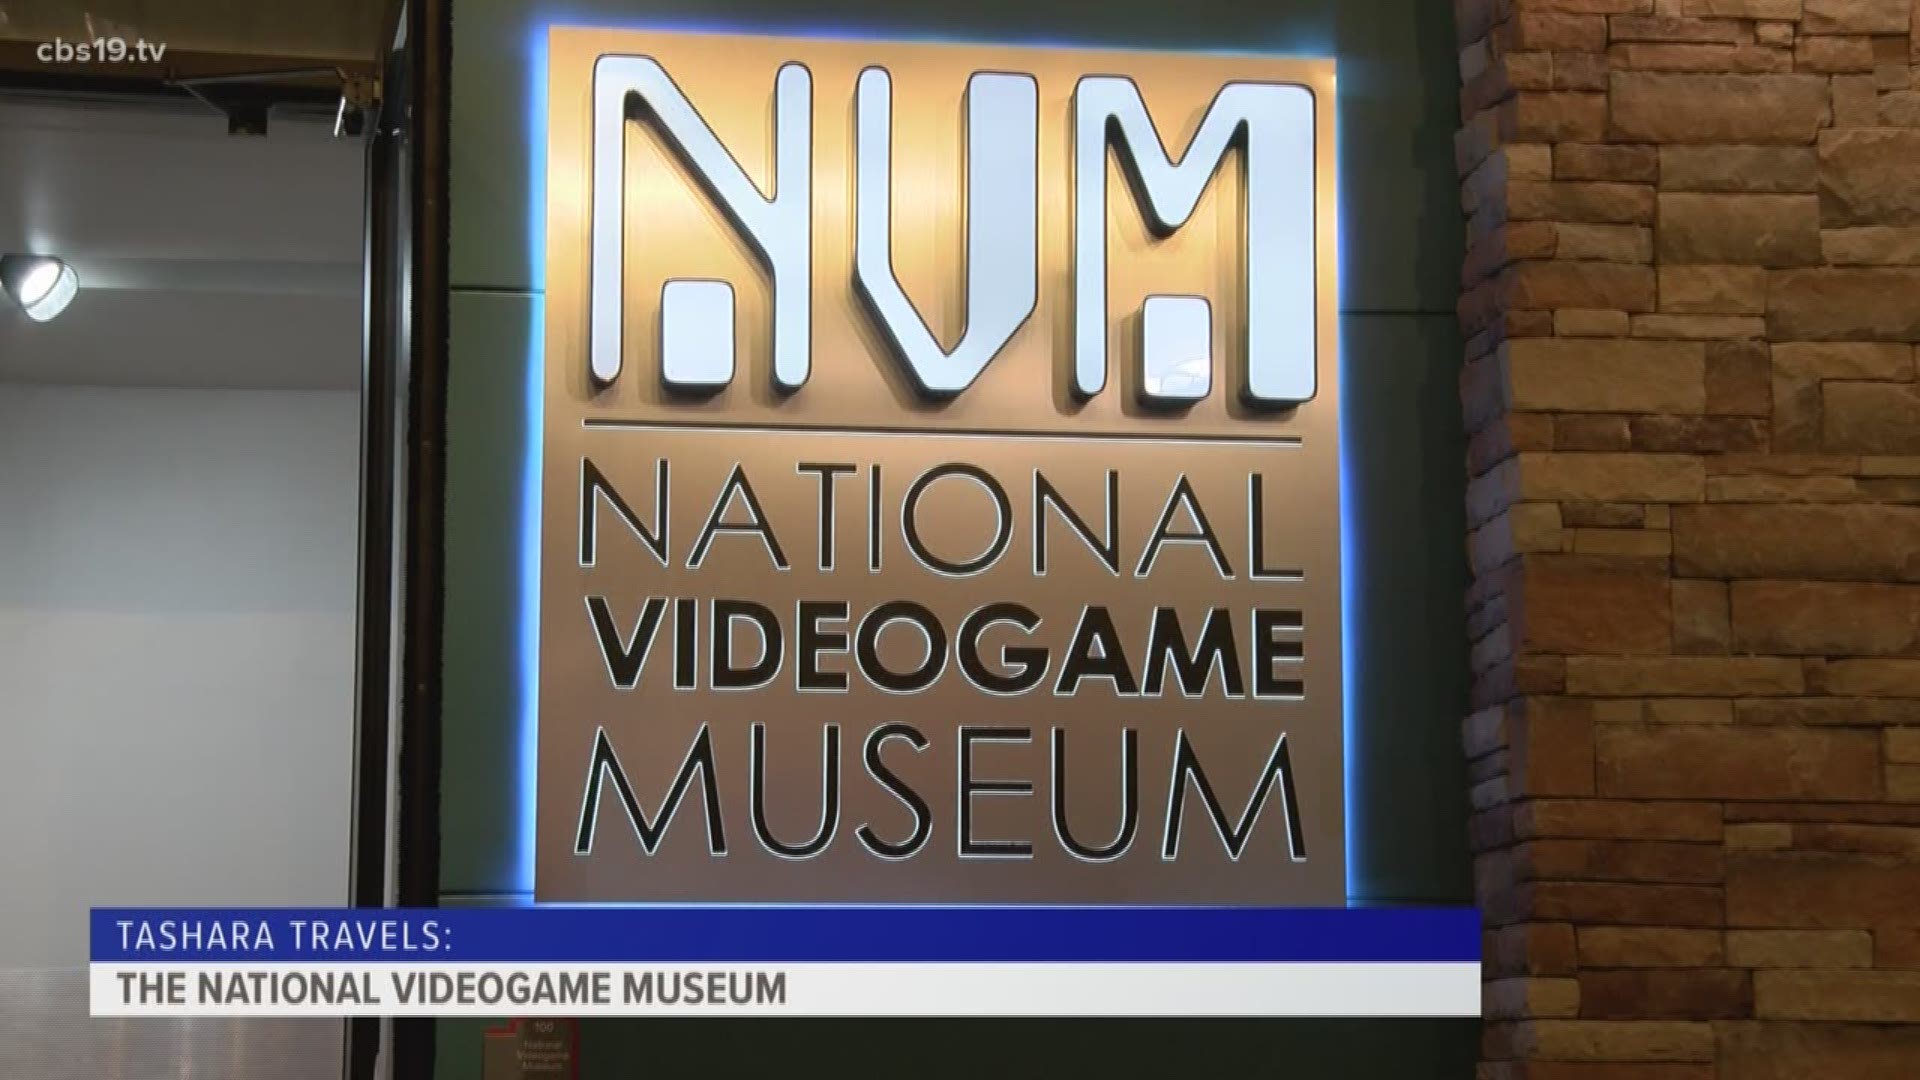 In this week's #TasharaTravels, we are taking a trip to the National Videogame Museum in Frisco, Texas. According to organizers, the National Videogame Museum is the only museum in America dedicated to the history of the video game industry.